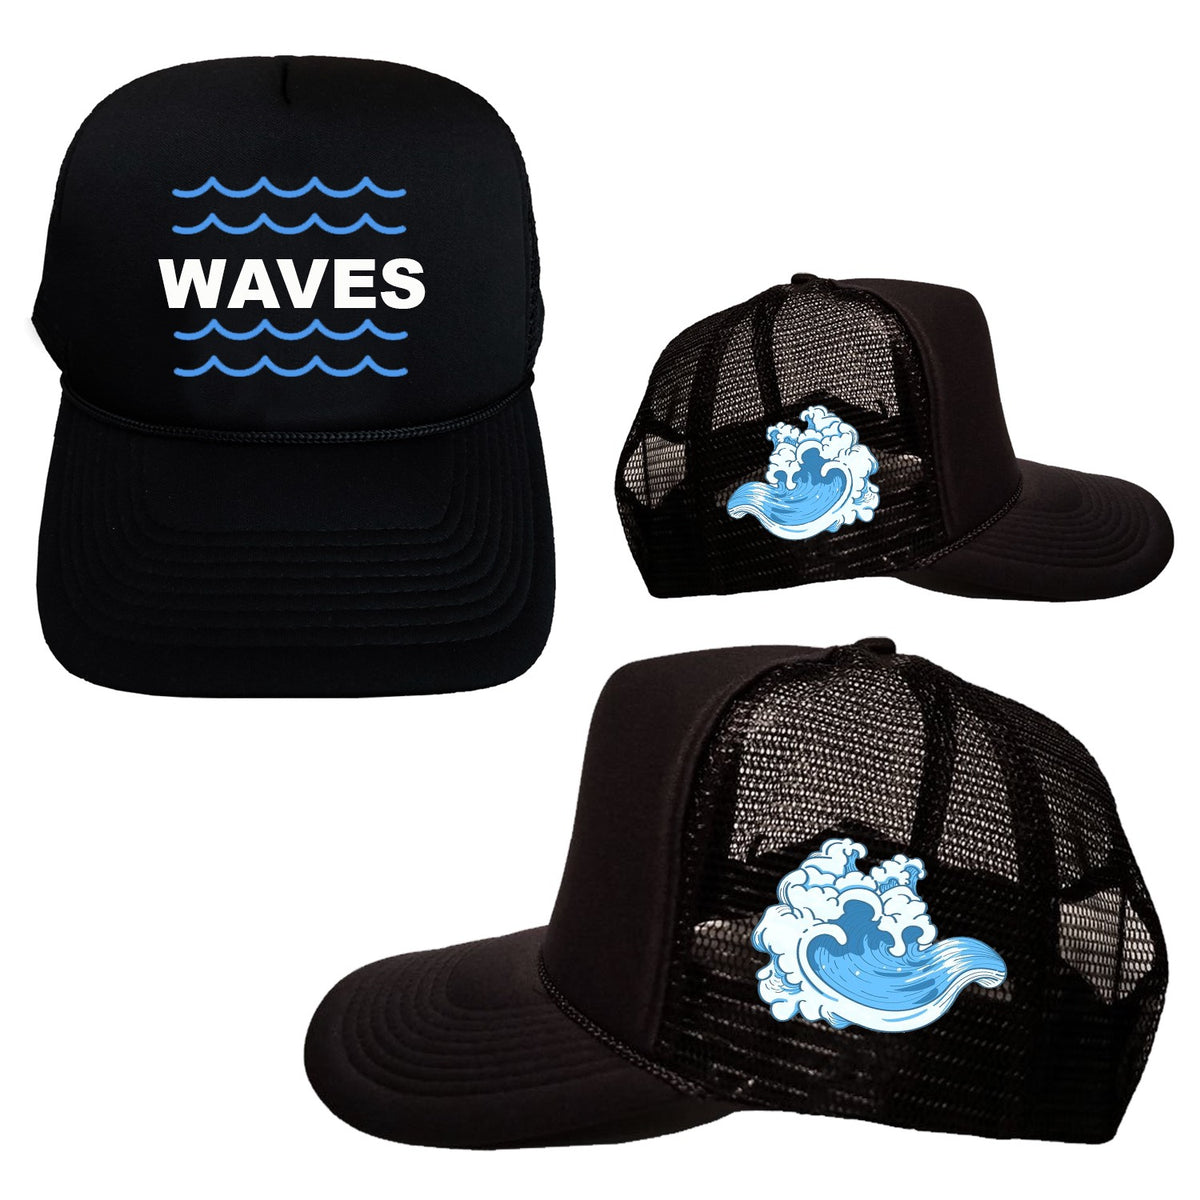 MPR CLOTHING BLACK RIDE THE WAVE TRUCKER HAT